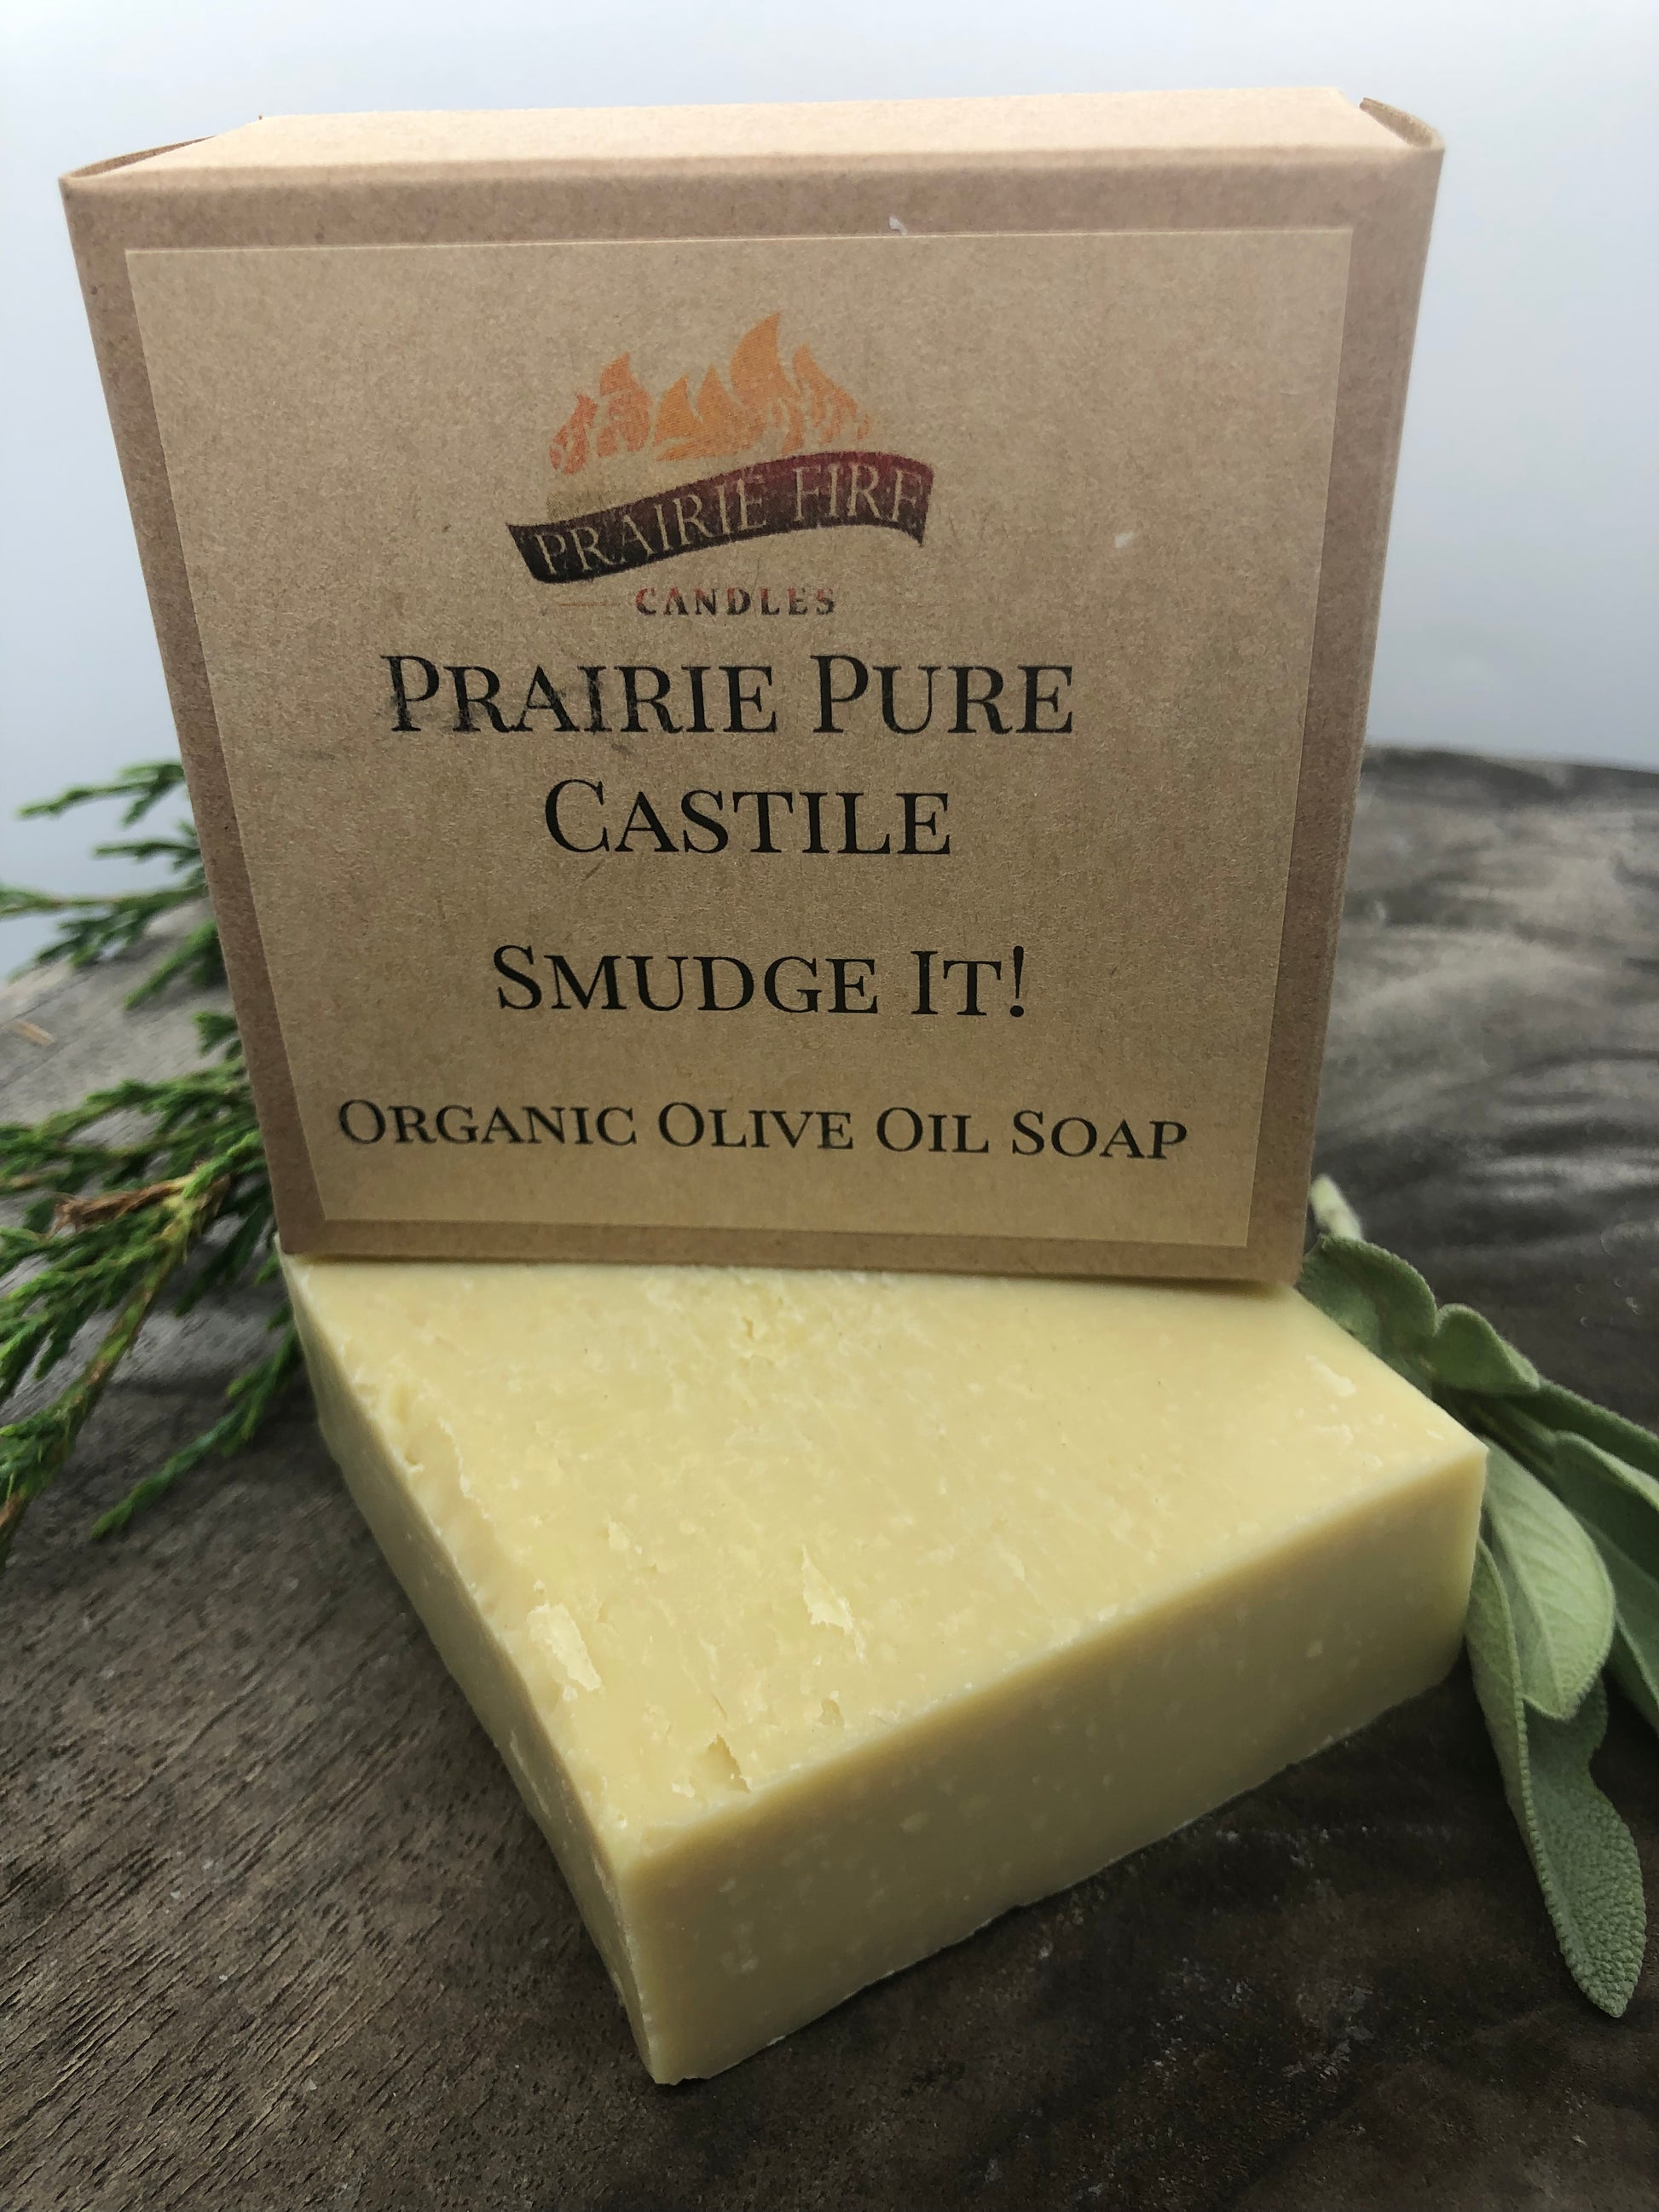 Smudge it! Real Castile Organic Olive Oil Soap for Sensitive Skin - Dye Free - 100% Certified Organic Extra Virgin Olive Oil - Prairie Fire Candles